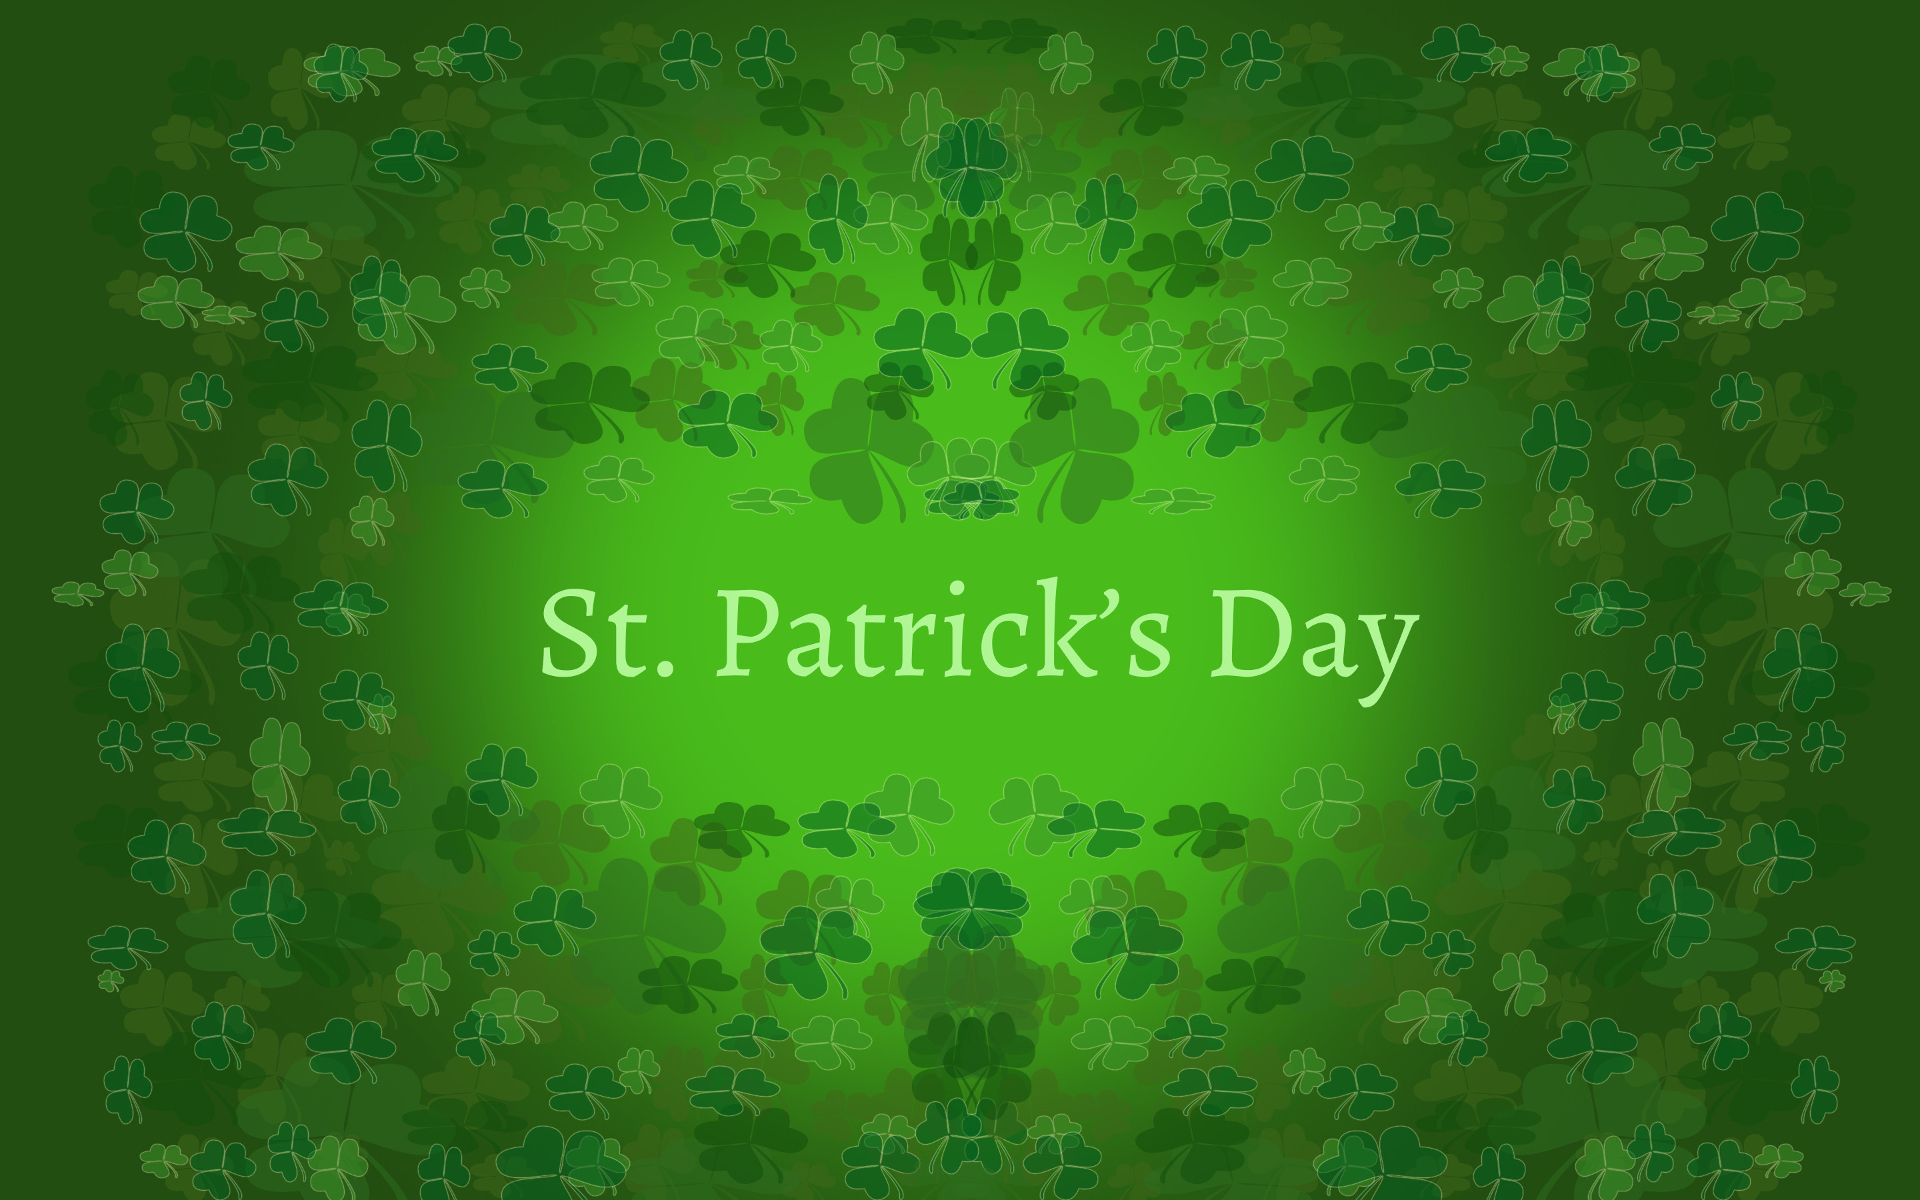 st patrick's day, holiday, clover, green